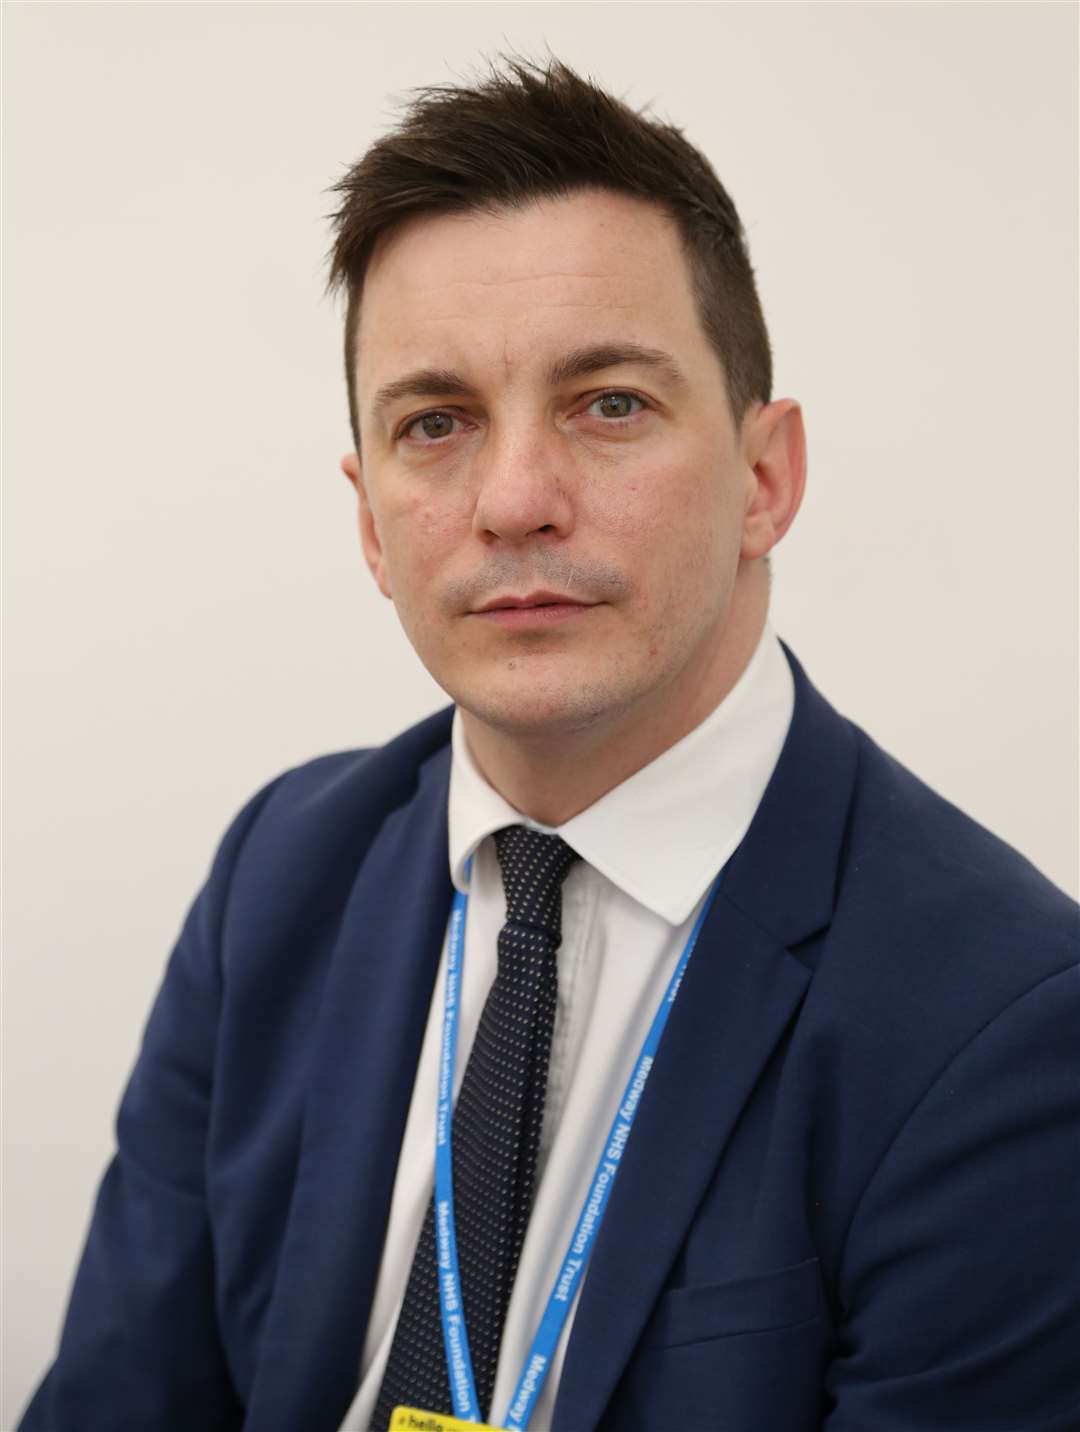 Medway NHS Foundation Trust chief executive James Devine